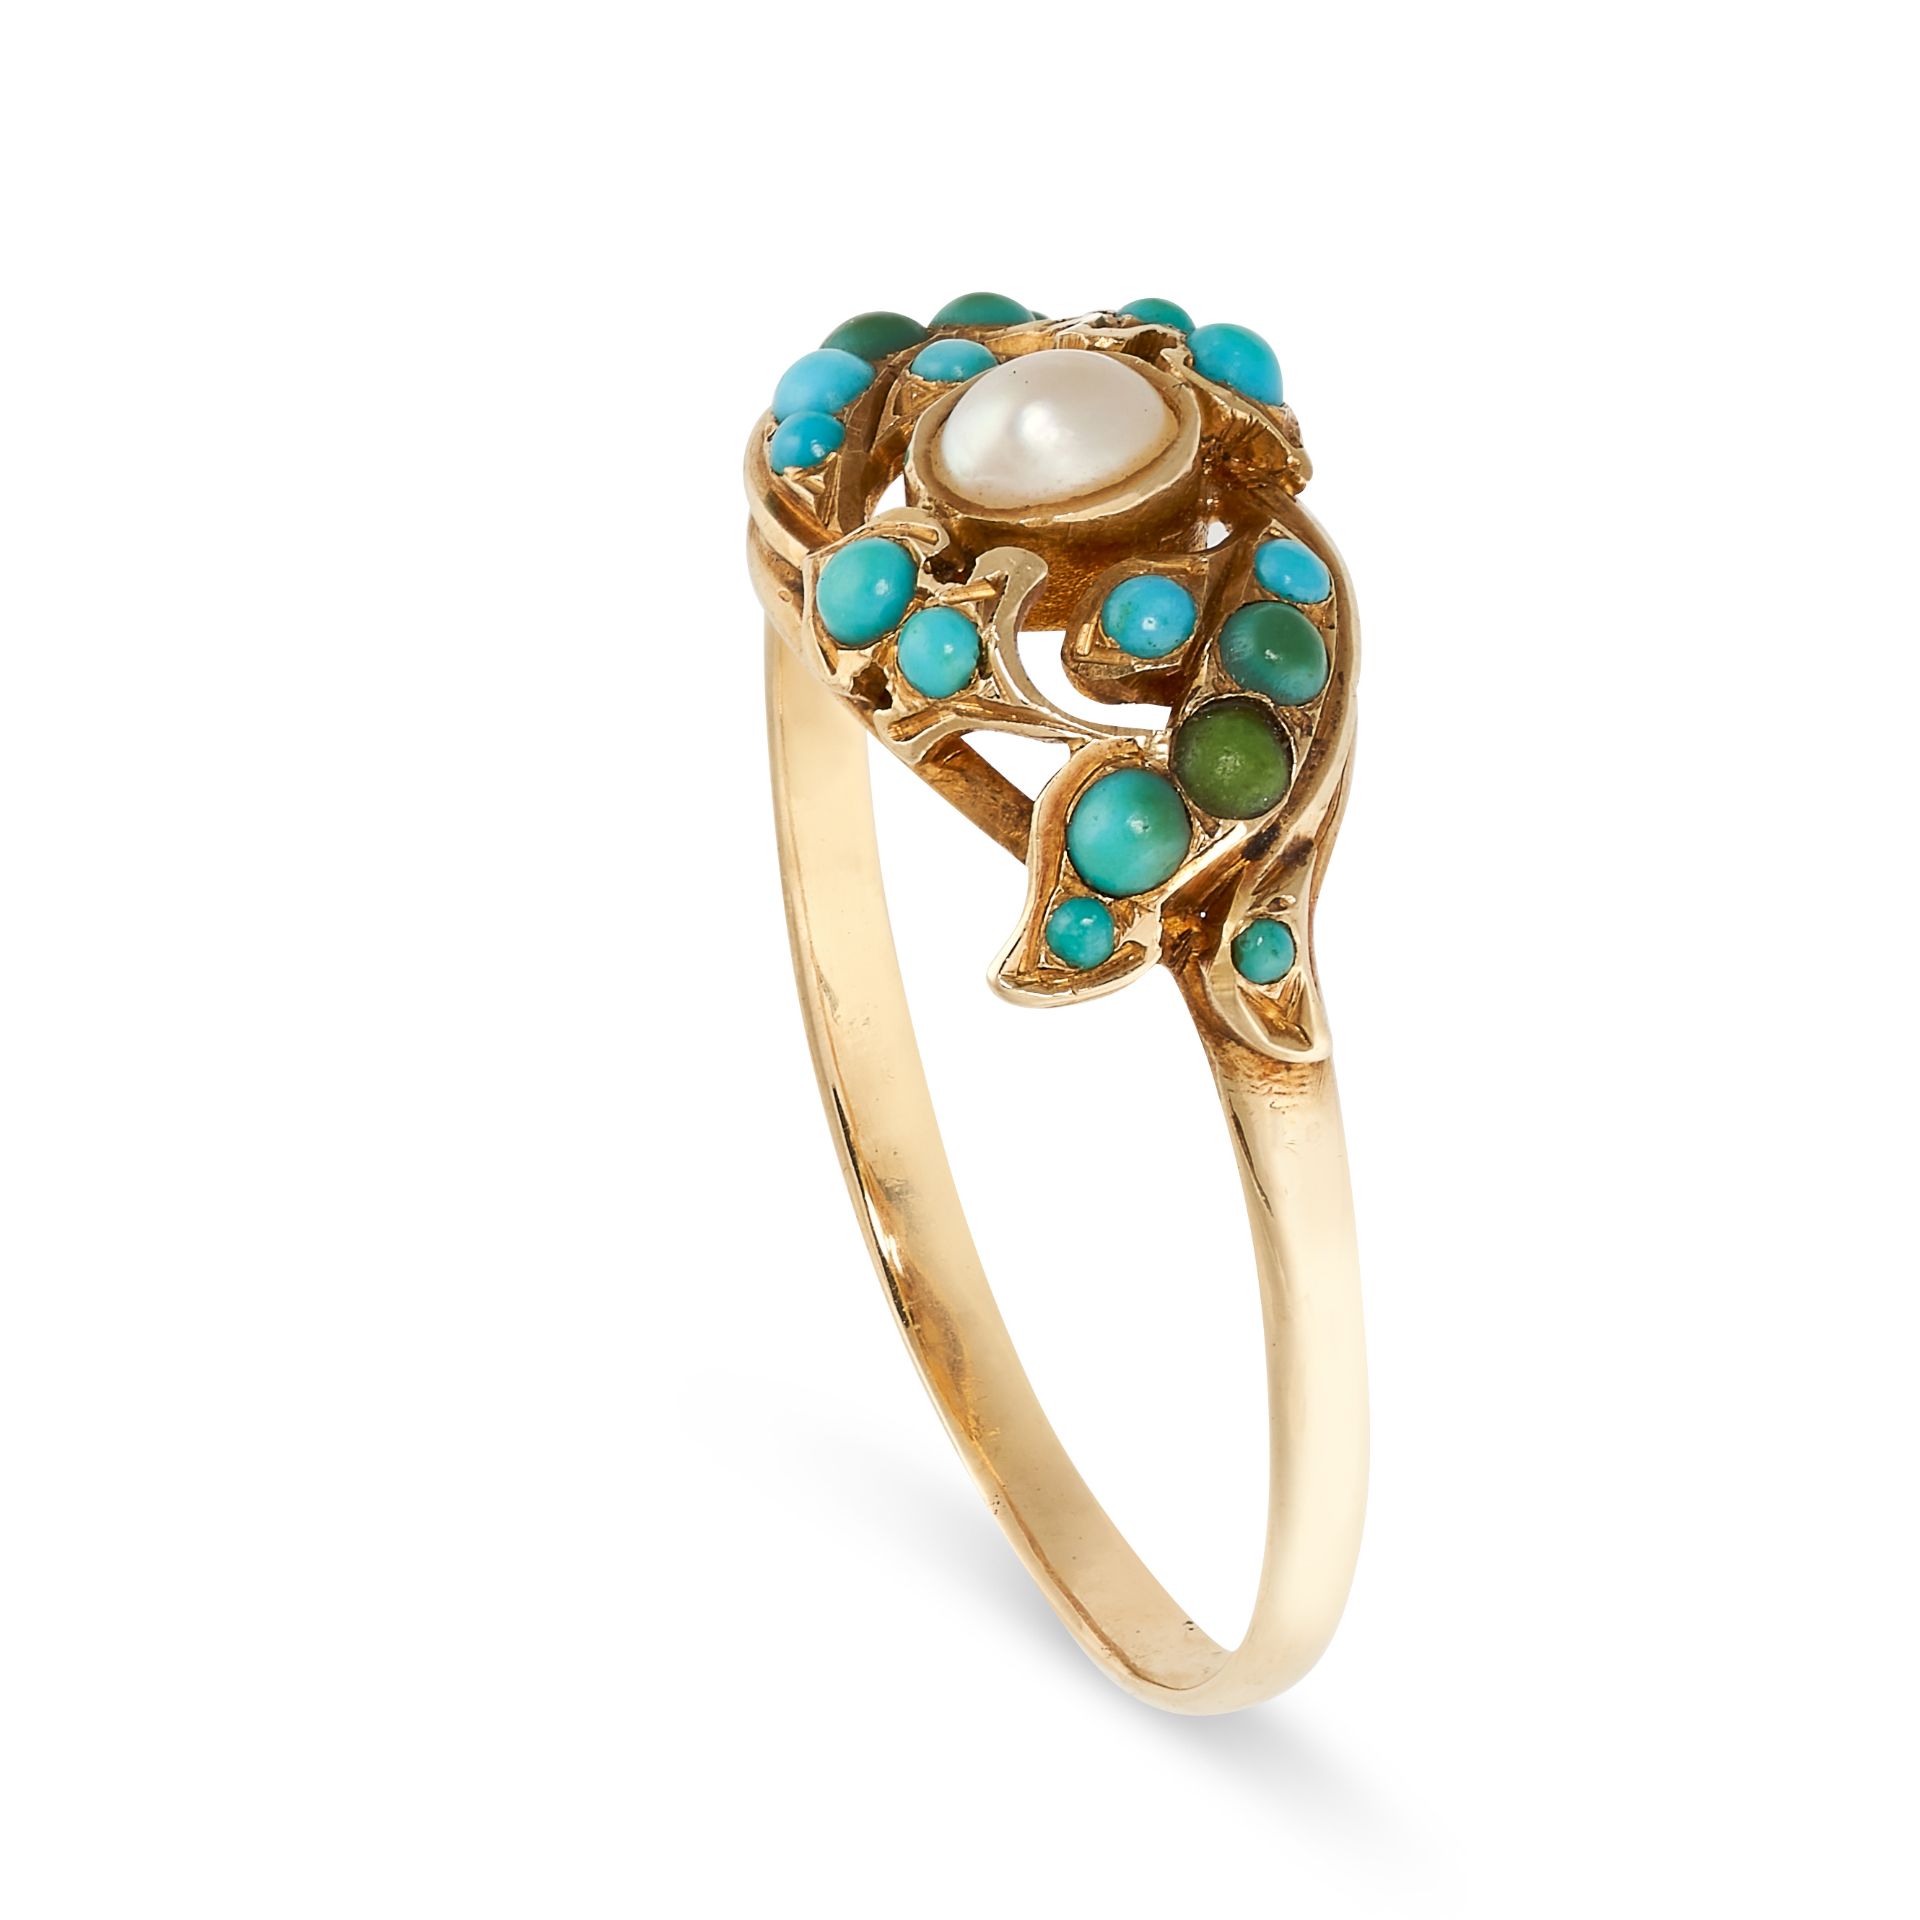 NO RESERVE - AN ANTIQUE PEARL AND TURQUOISE DRESS RING in yellow gold, the band set with a pearl - Image 2 of 2